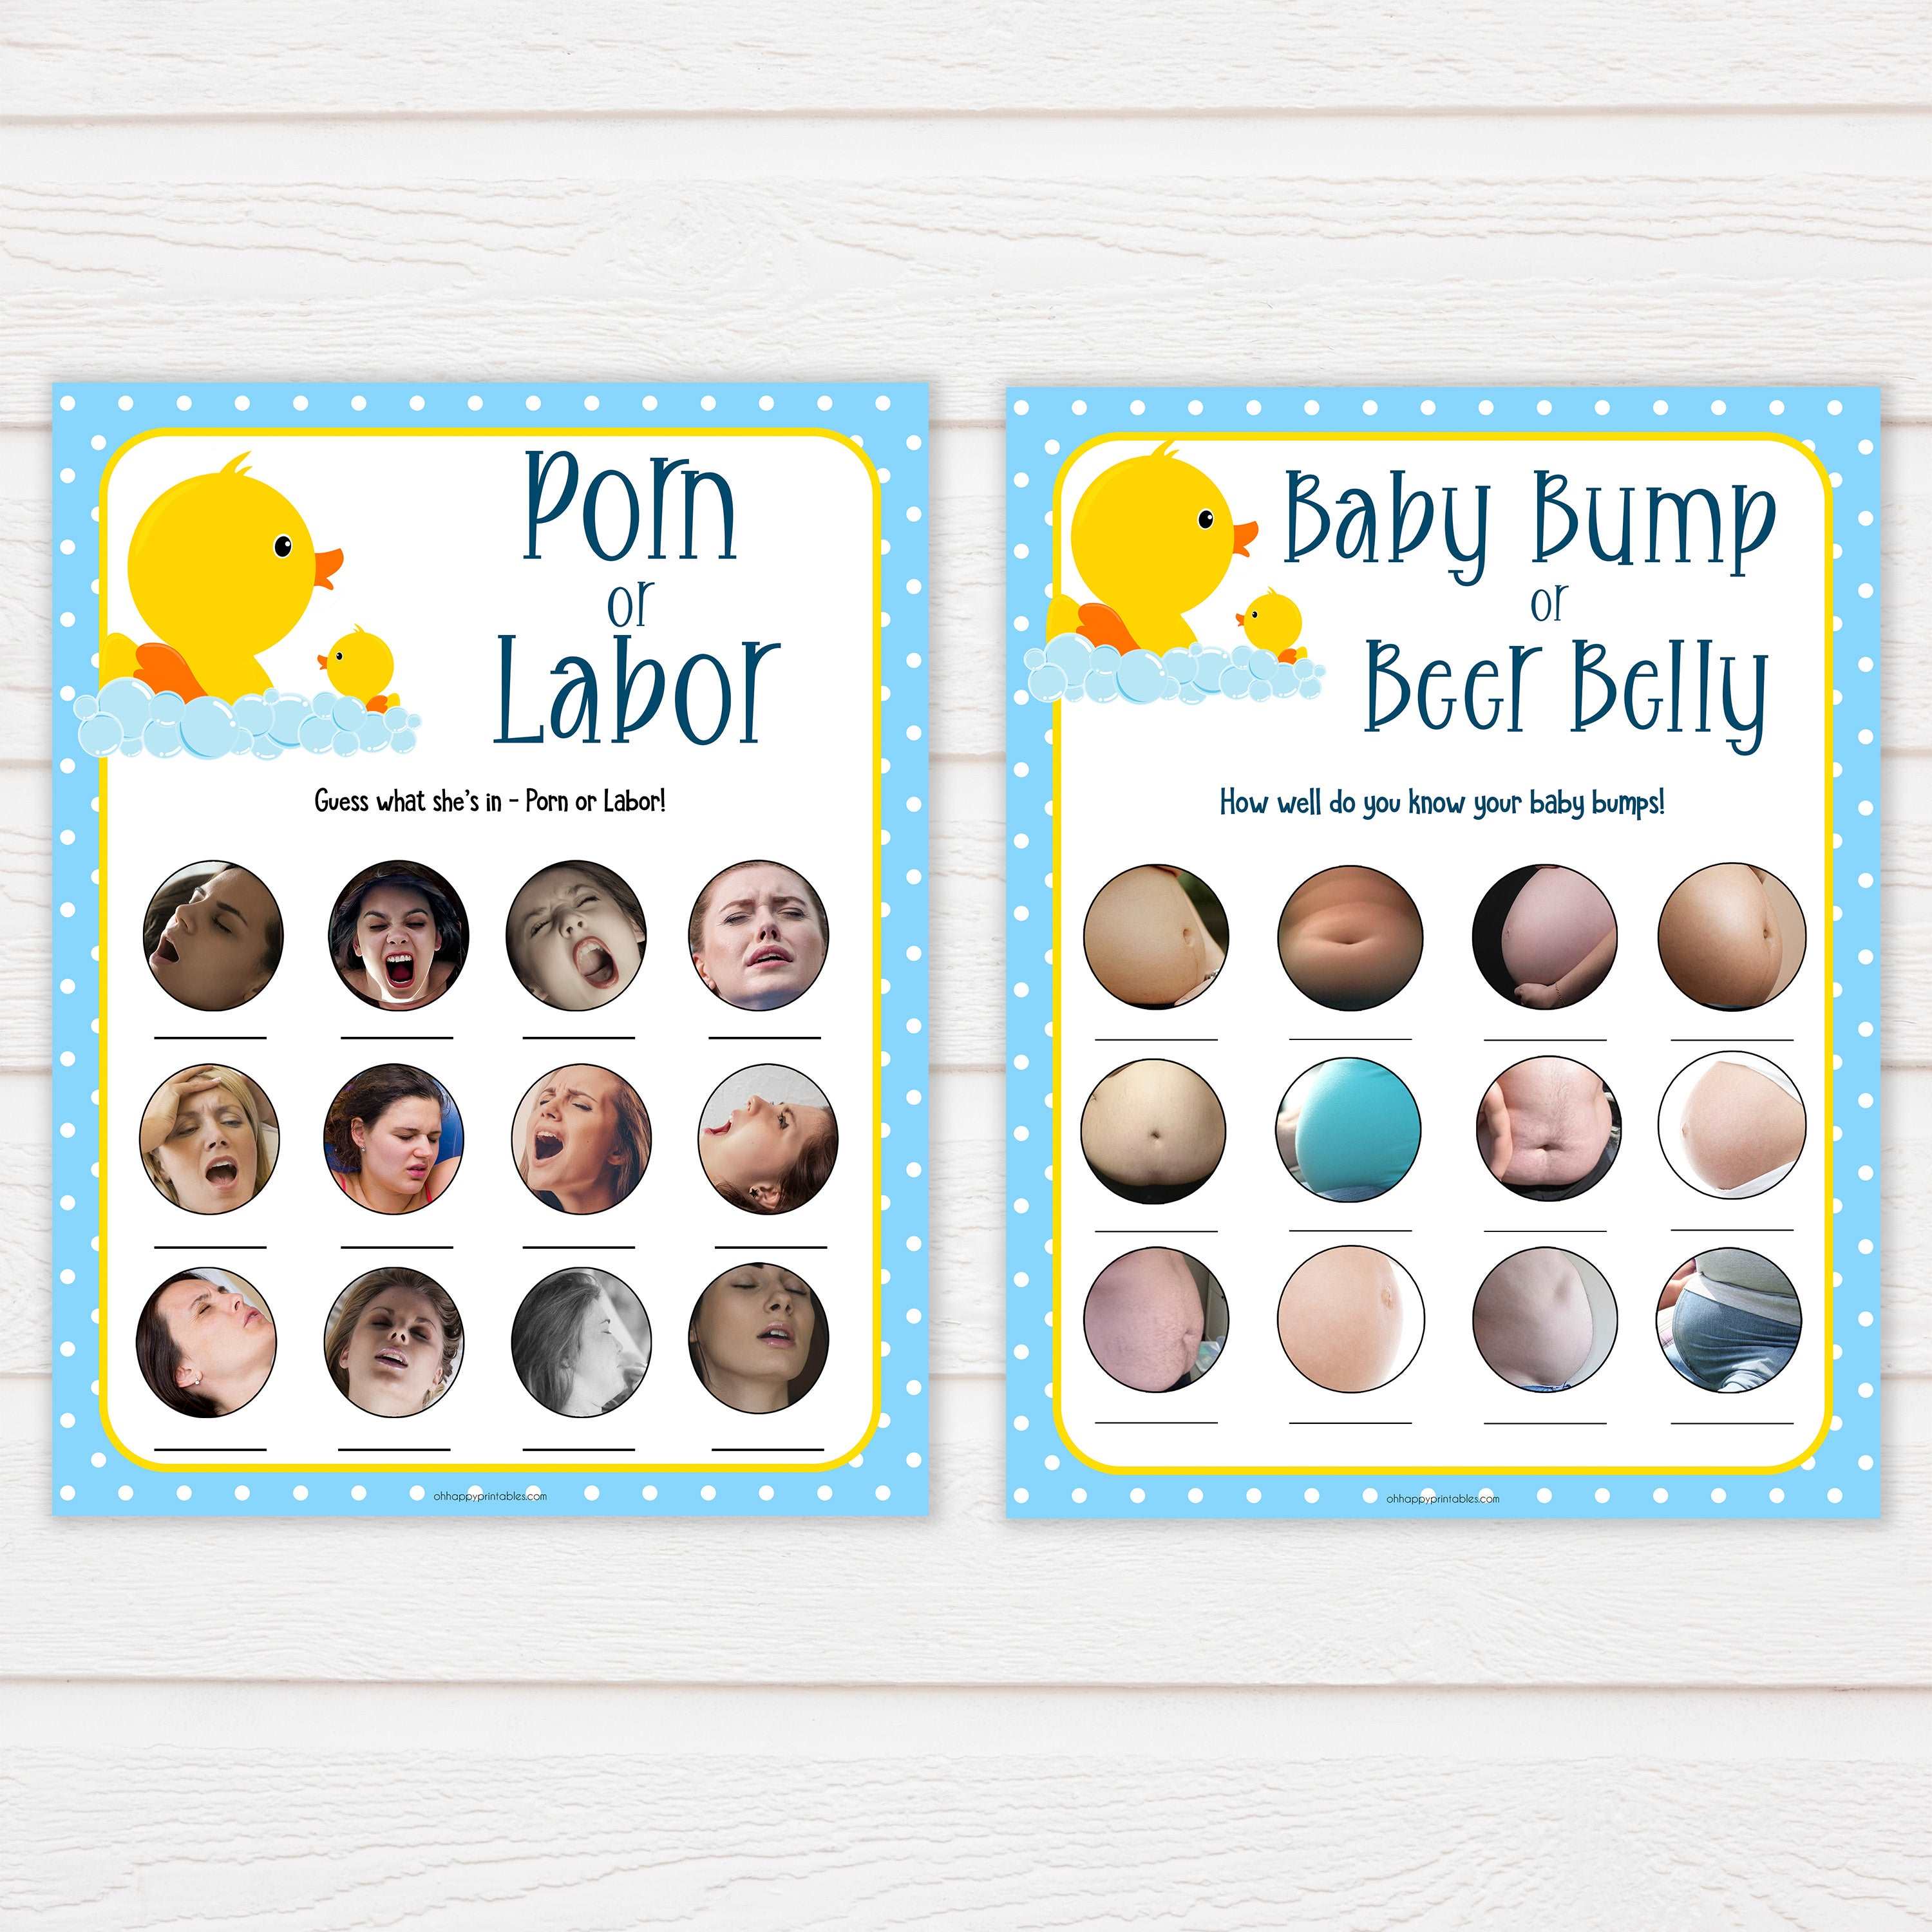 rubber ducky baby games, 10 baby shower games, baby shower bundle, baby game pack, printable baby games, baby shower games, rubber ducky baby theme, fun baby games, popular baby games